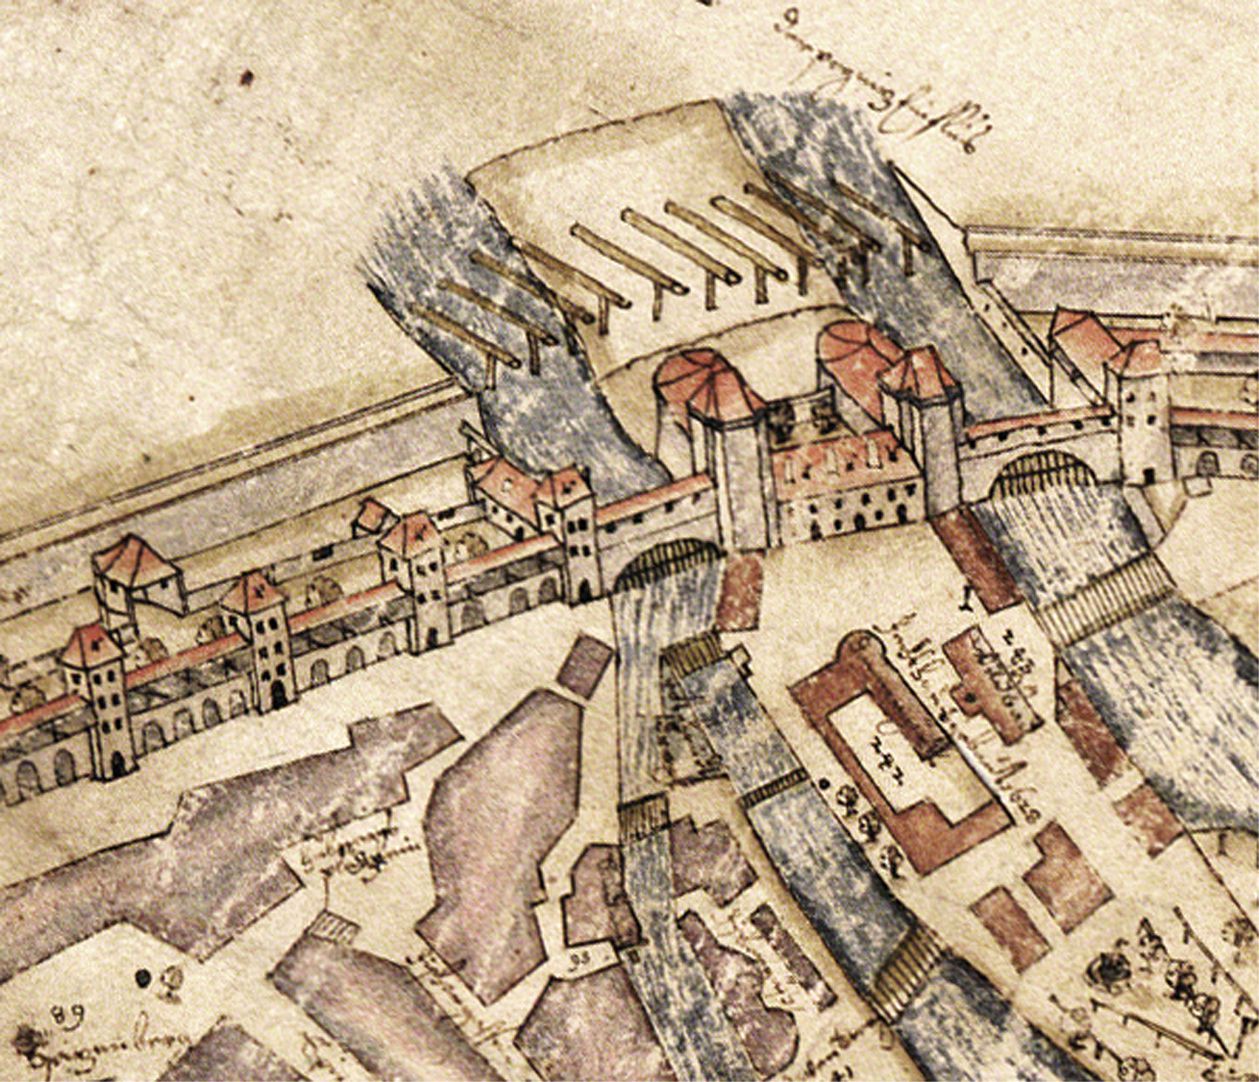 This City of Nuremberg within its enclosing walls… River Pegnitz, Casemate gate and Canon Towers of 1559 as well as ice breakers (from the northwest)